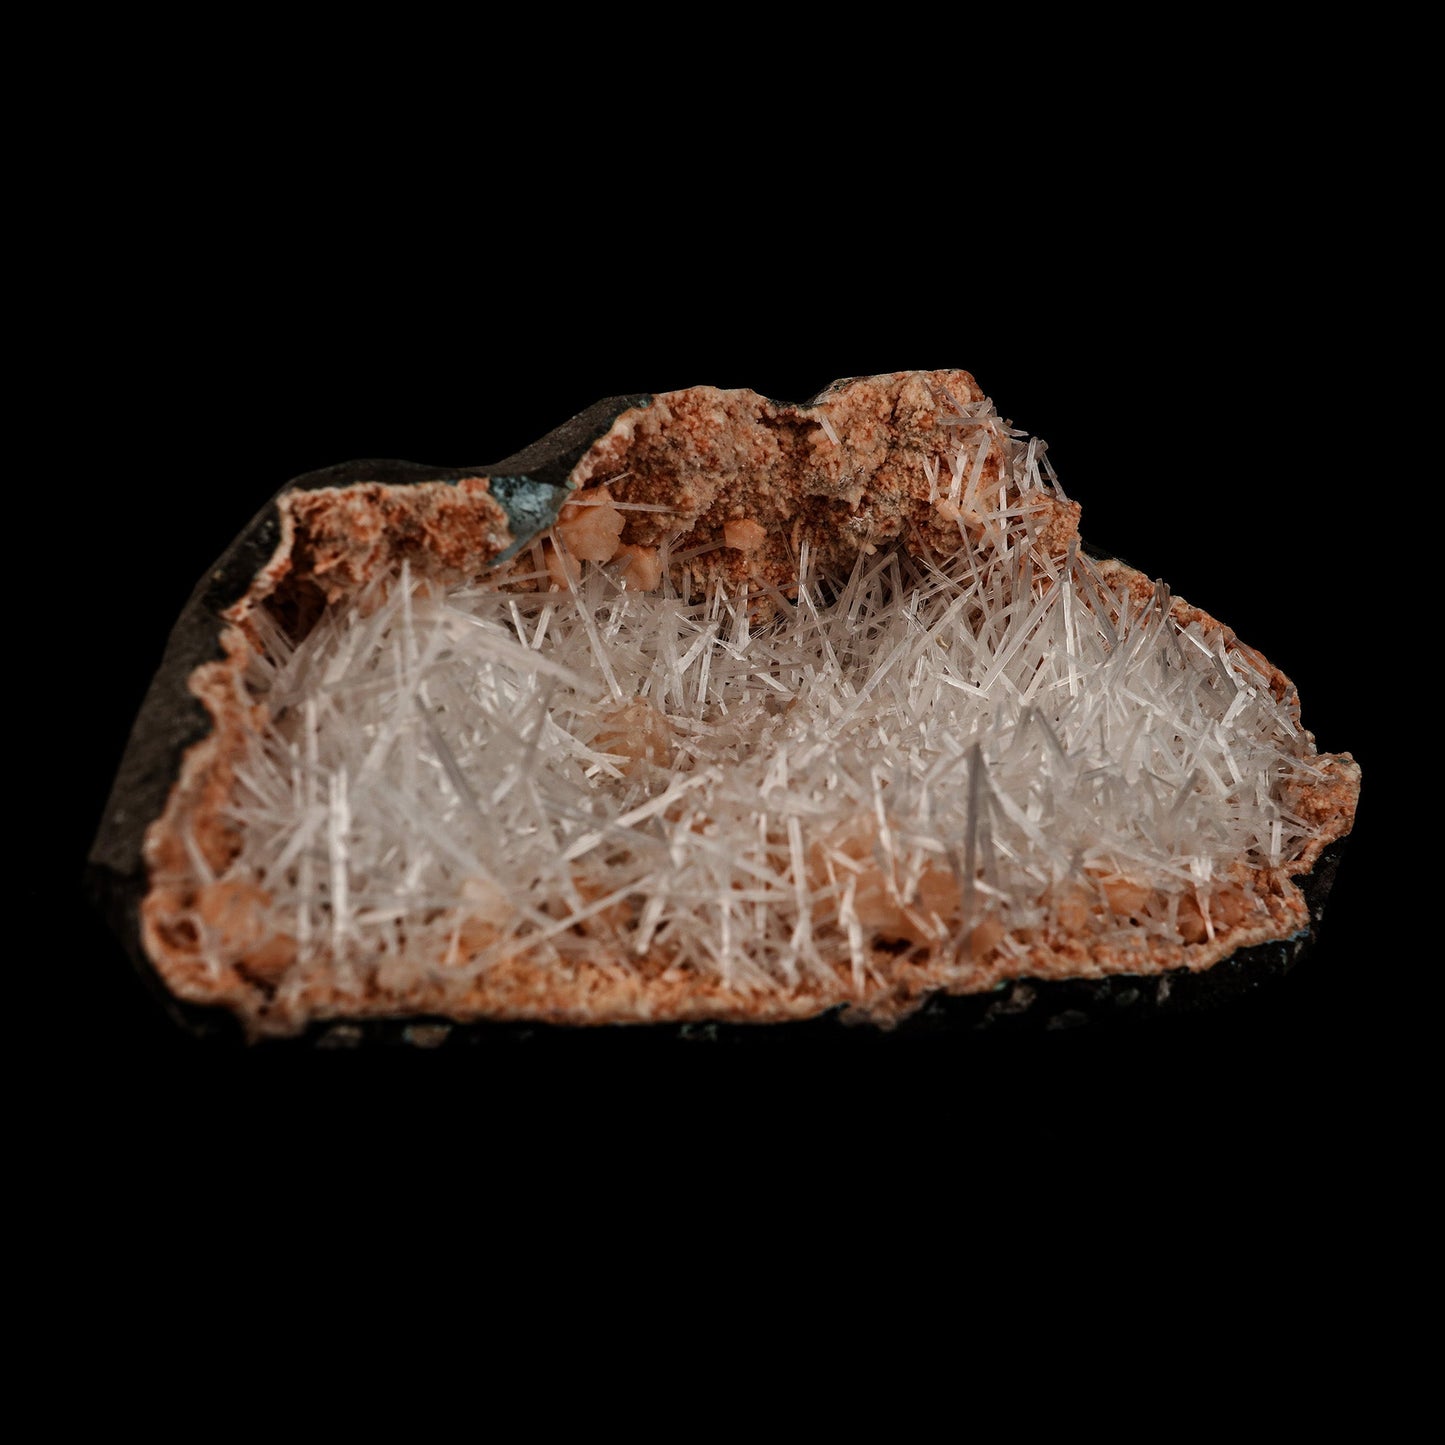 Scolecite Sprays Inside Heulandite Geode Natural Mineral Specimen # B…  https://www.superbminerals.us/products/scolecite-sprays-inside-heulandite-geode-natural-mineral-specimen-b-5071  Features: A big, free-standing Geode bordered with peach-colored Heulandite crystals and including two clusters of beige Stilbite crystals. The Geode is a three-dimensional object that is tall, thin, and deep. Very attractive and in great condition. Primary Mineral(s): ScoleciteSecondary Mineral(s): Heulandite